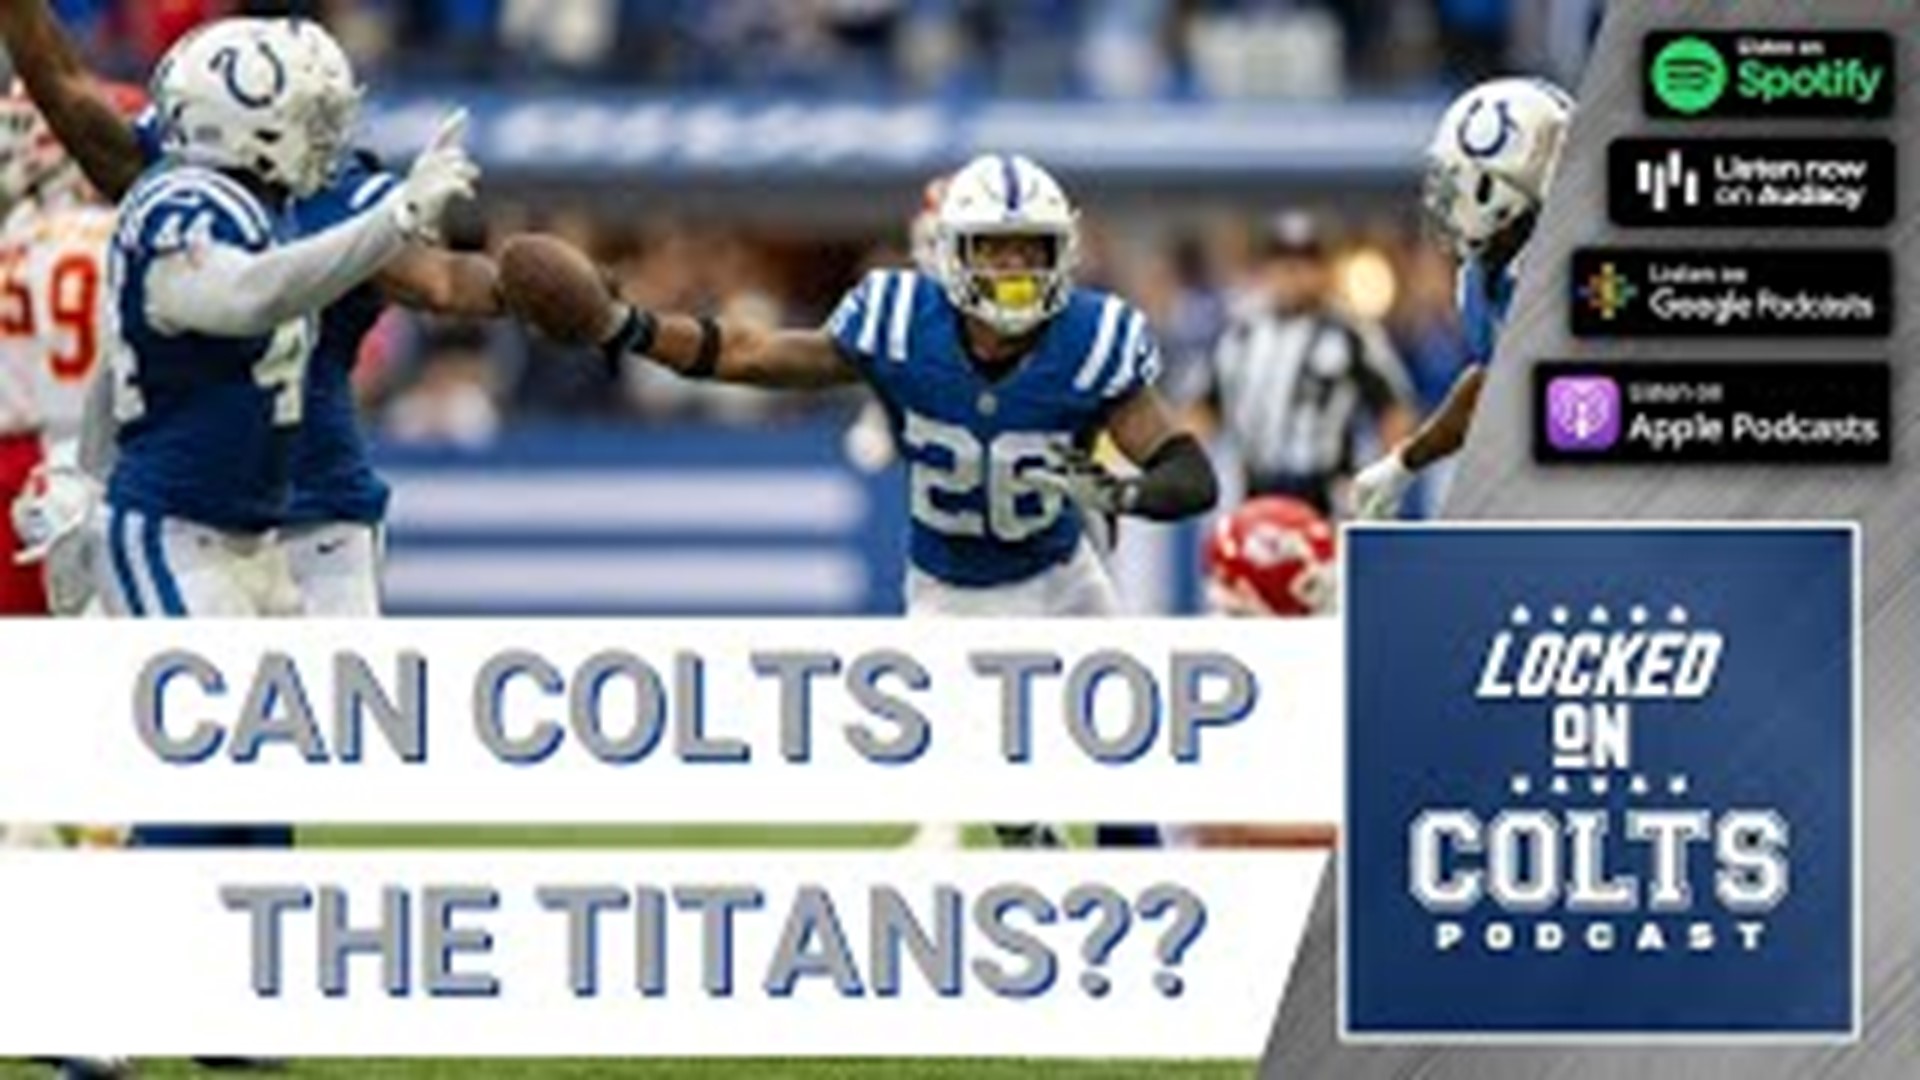 Can the Indianapolis Colts carry the momentum from last week into this divisional game?